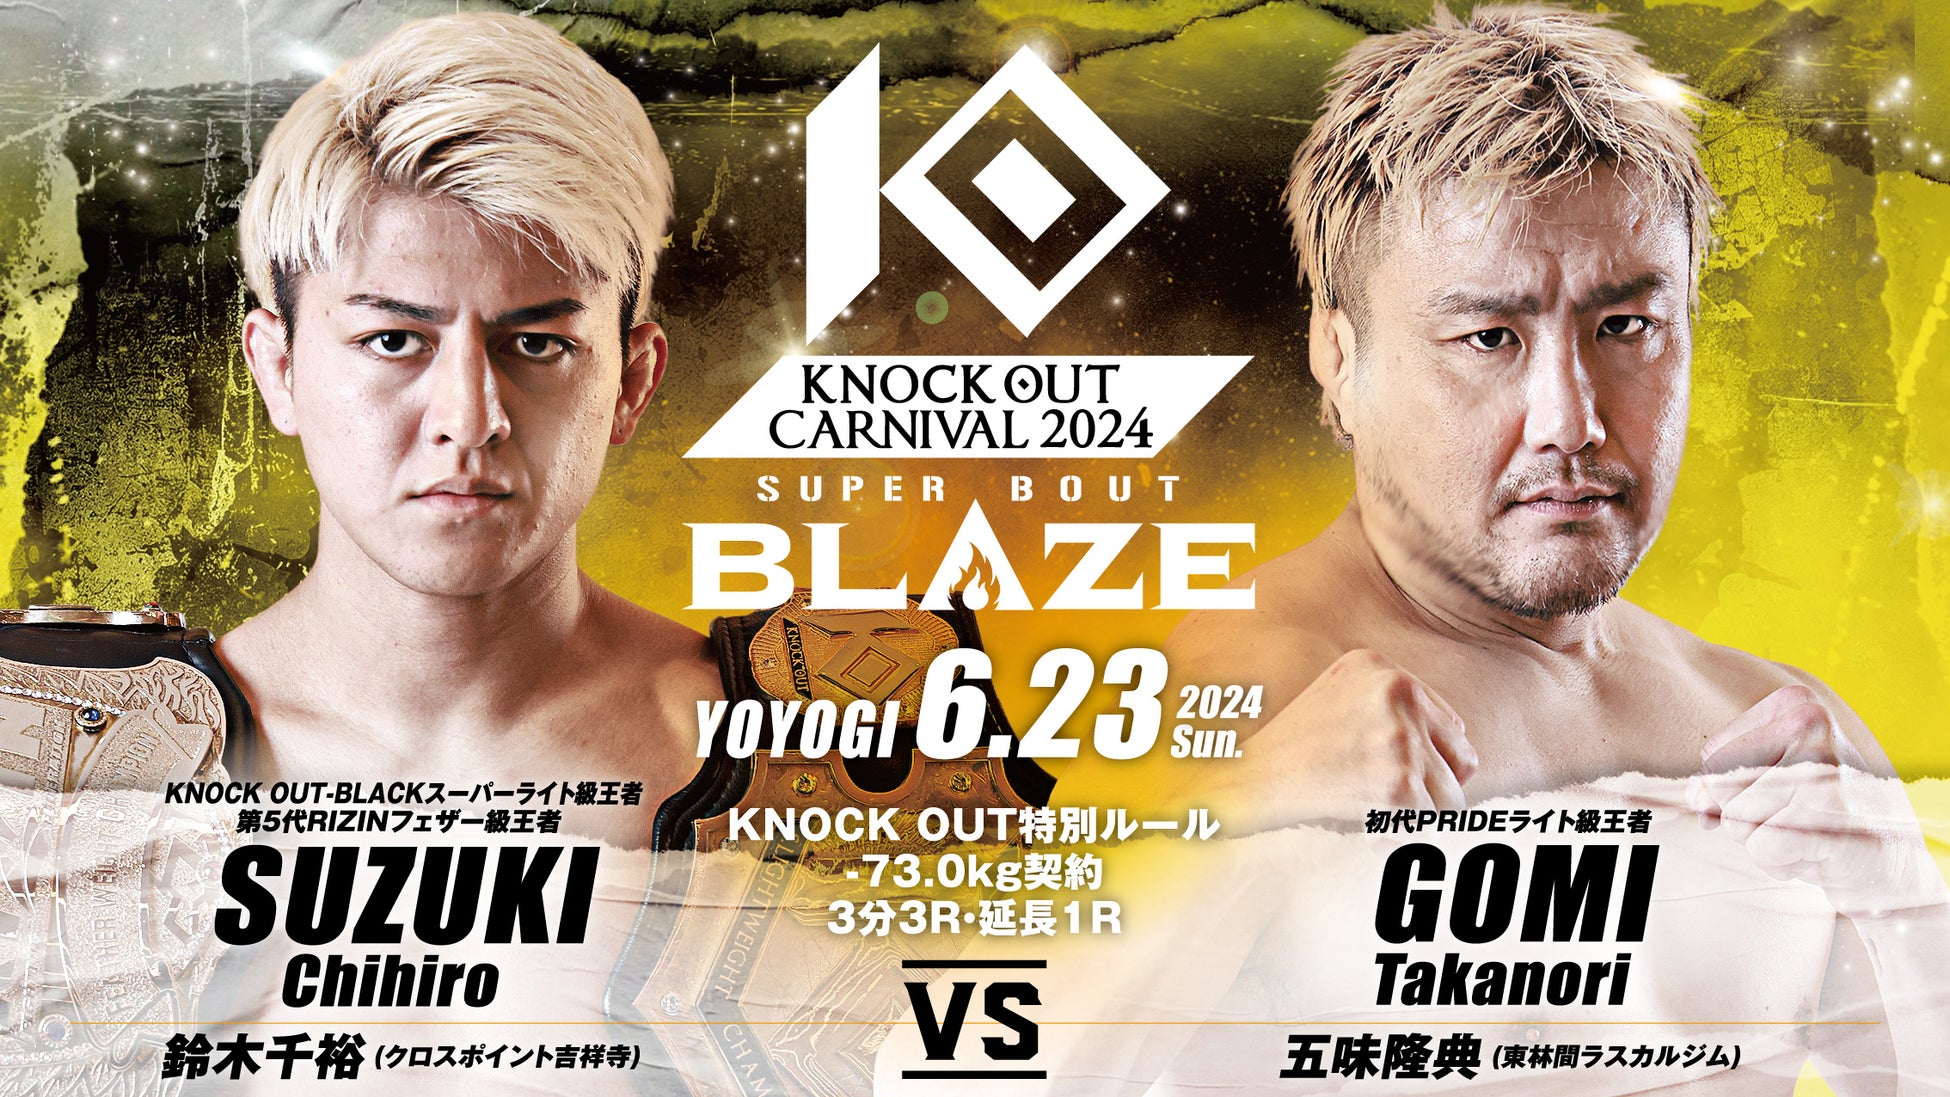 『KNOCK OUT CARNIVAL 2024 SUPER BOUT”BLAZE”』U-NEXT見放題ライブ配信！『THE KNOCK OUT FIGHTER』エピソード1もYoutube無料公開